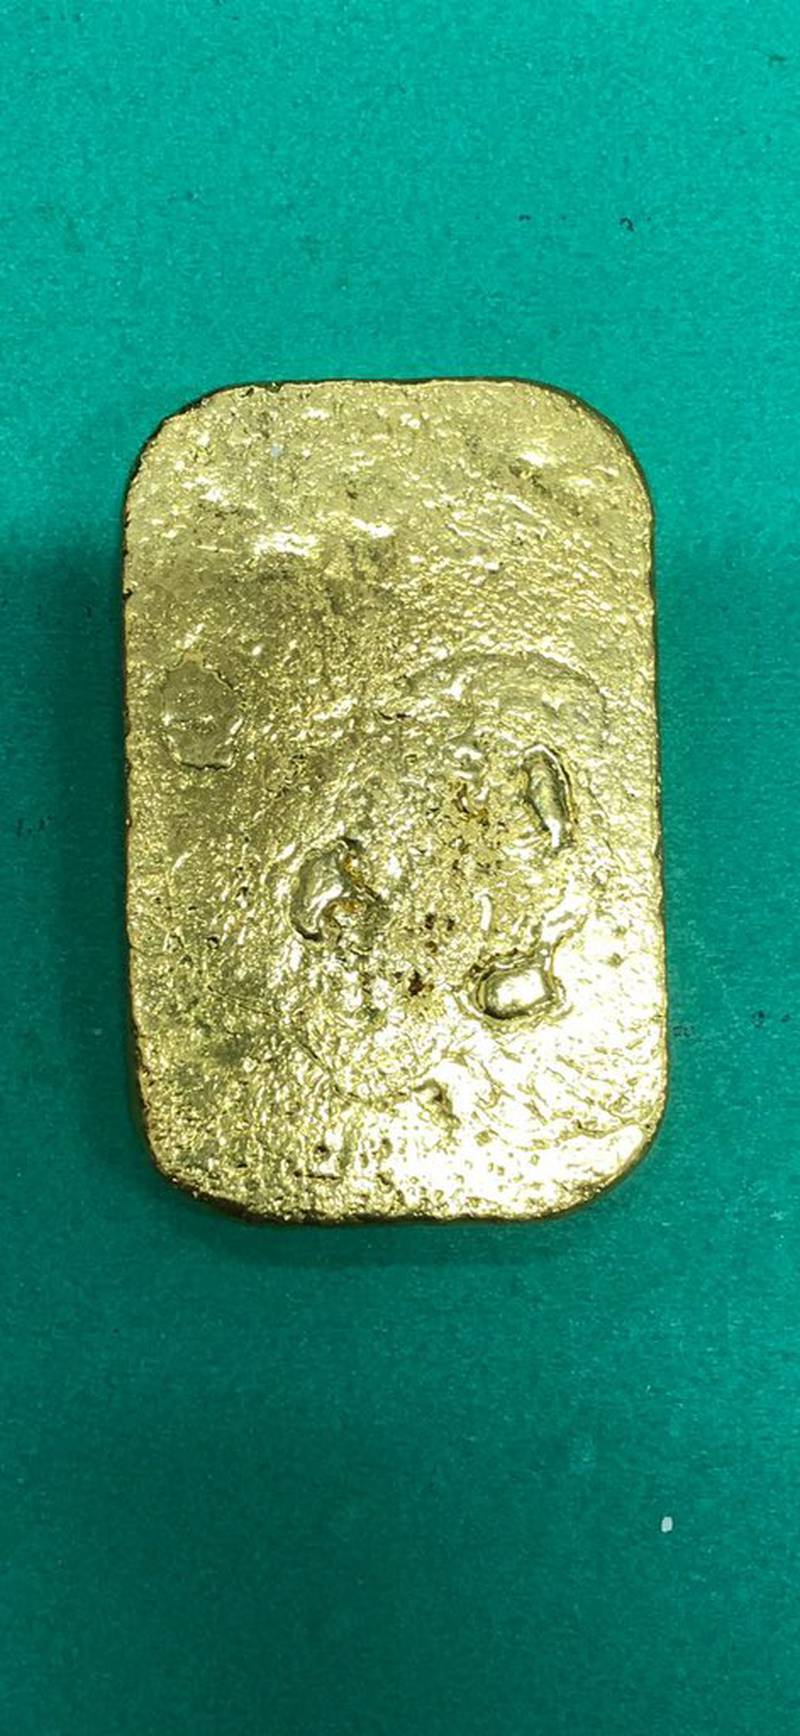 Delhi Customs said a passenger who came off a flight from Dubai was found to have melted down this 443 gram bar of gold into a paste and wrapped it around his legs. Photo: Delhi Customs